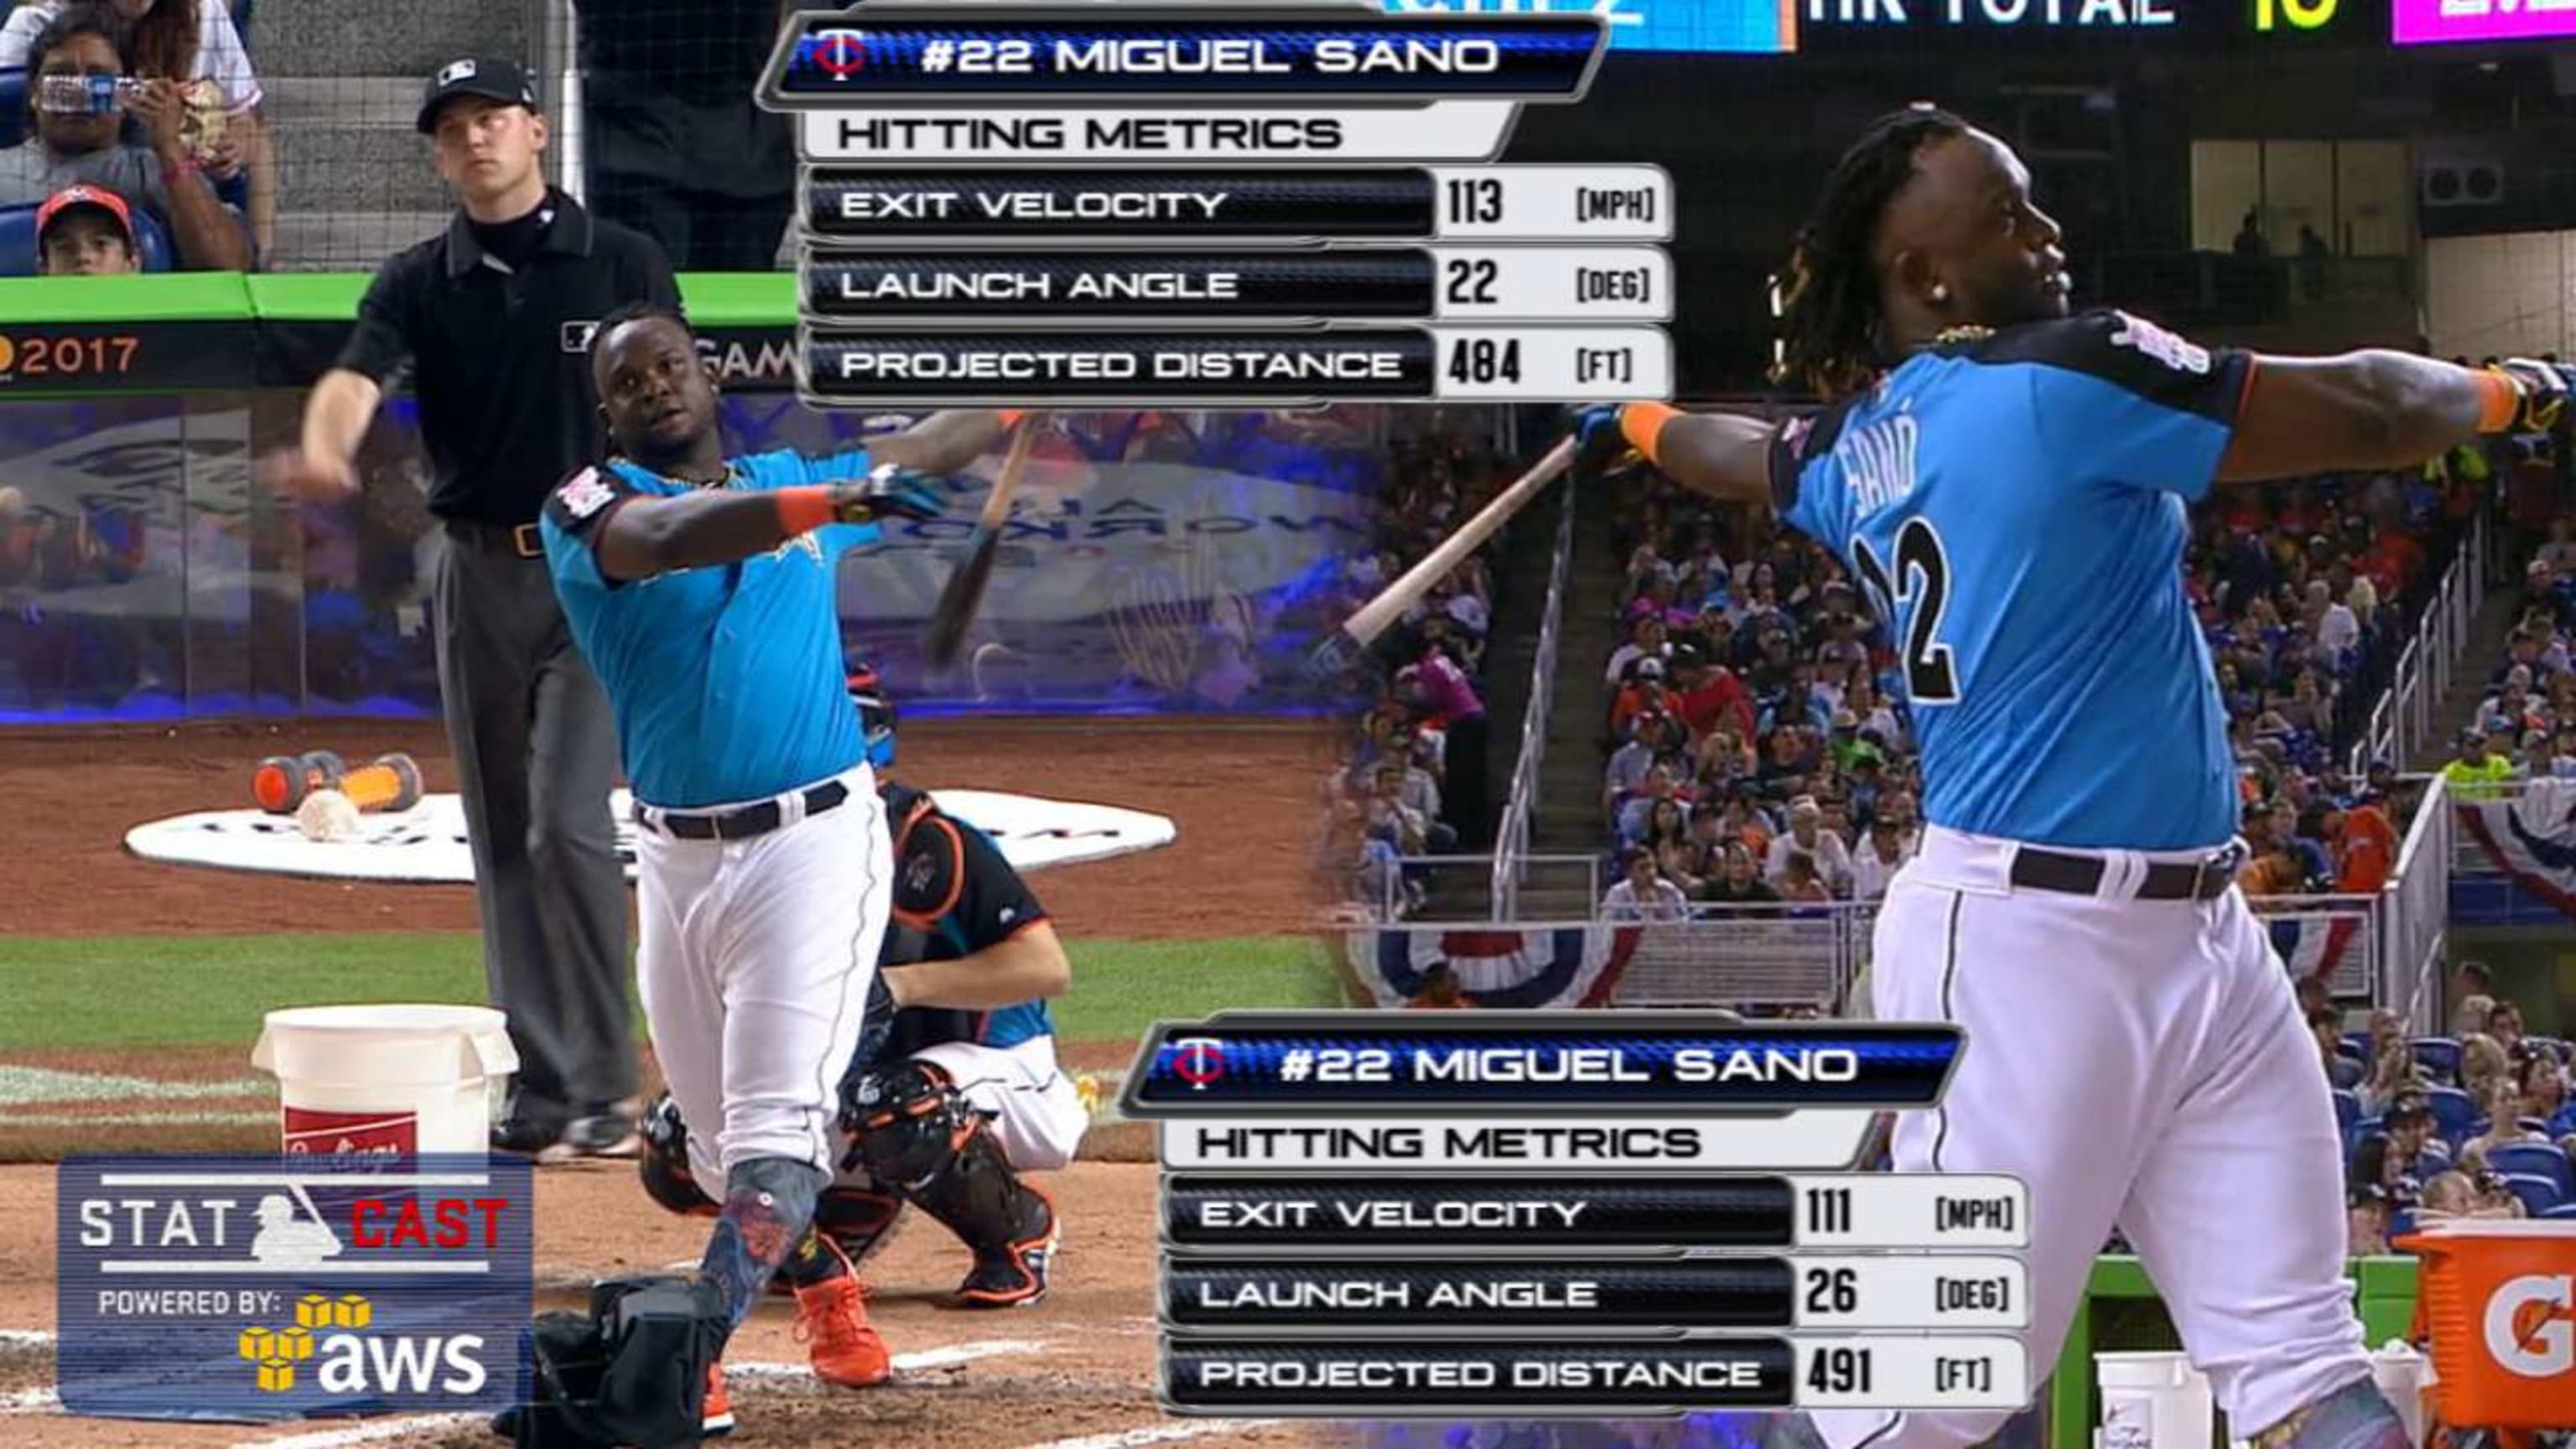 Miguel Sano, 99 Home Run Derby - MLB the Show 23